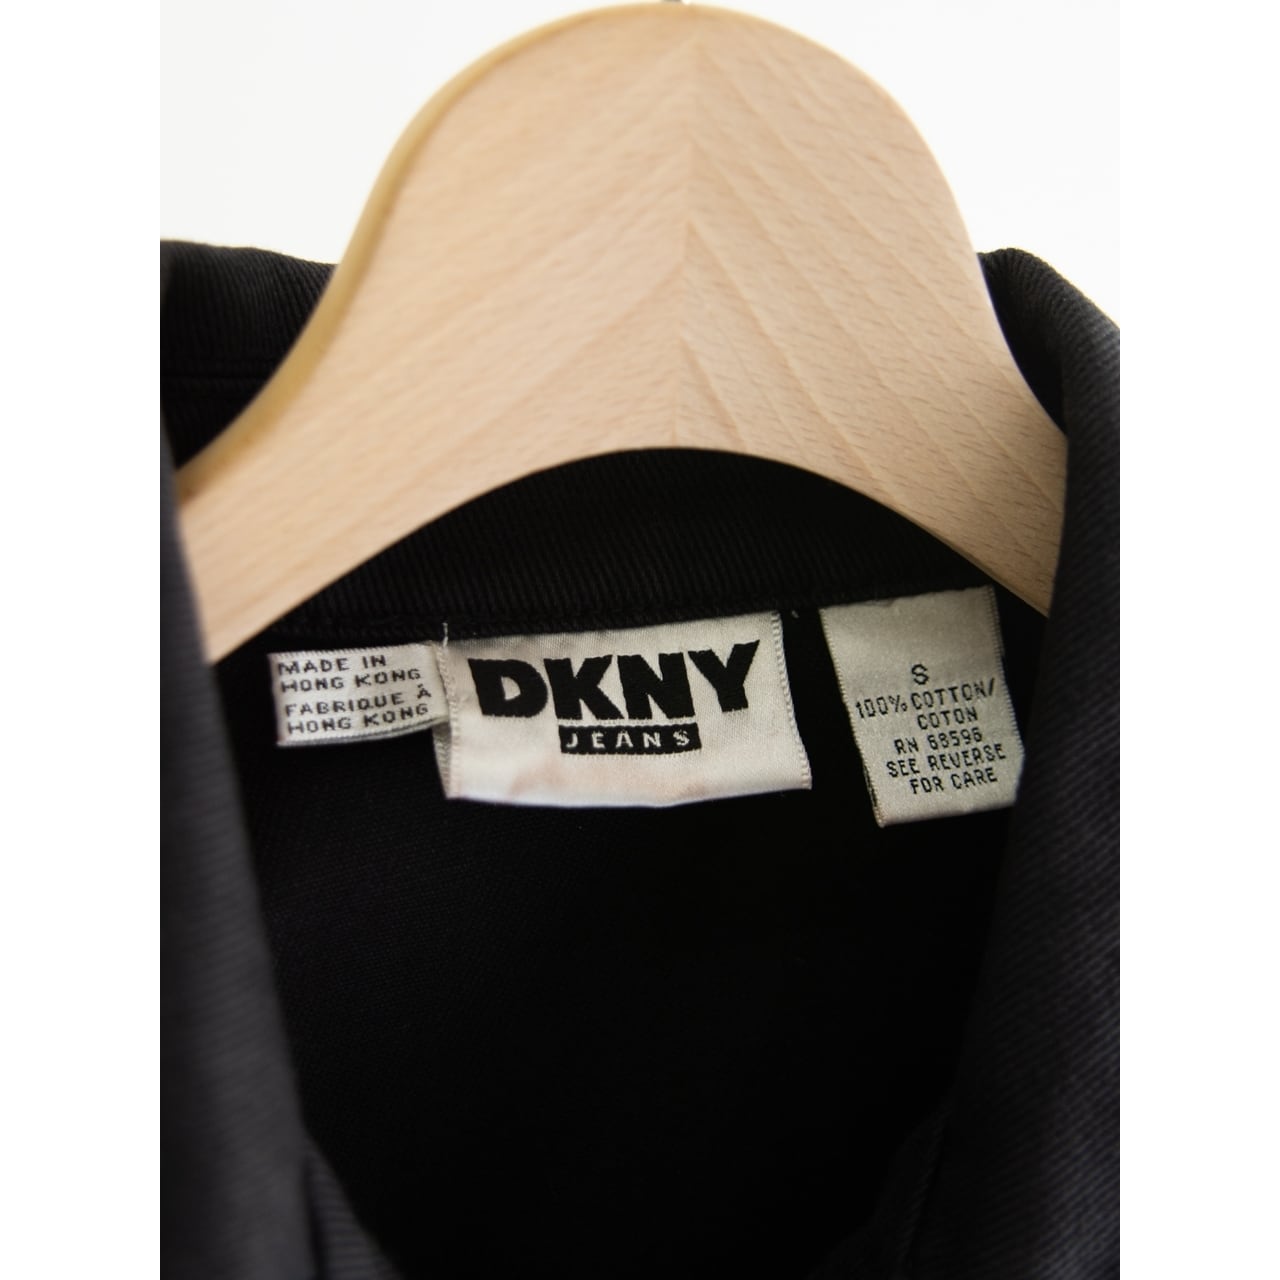 DKNY JEANS】Made in Hong Kong 90's 100% Cotton Black Denim Jacket ...